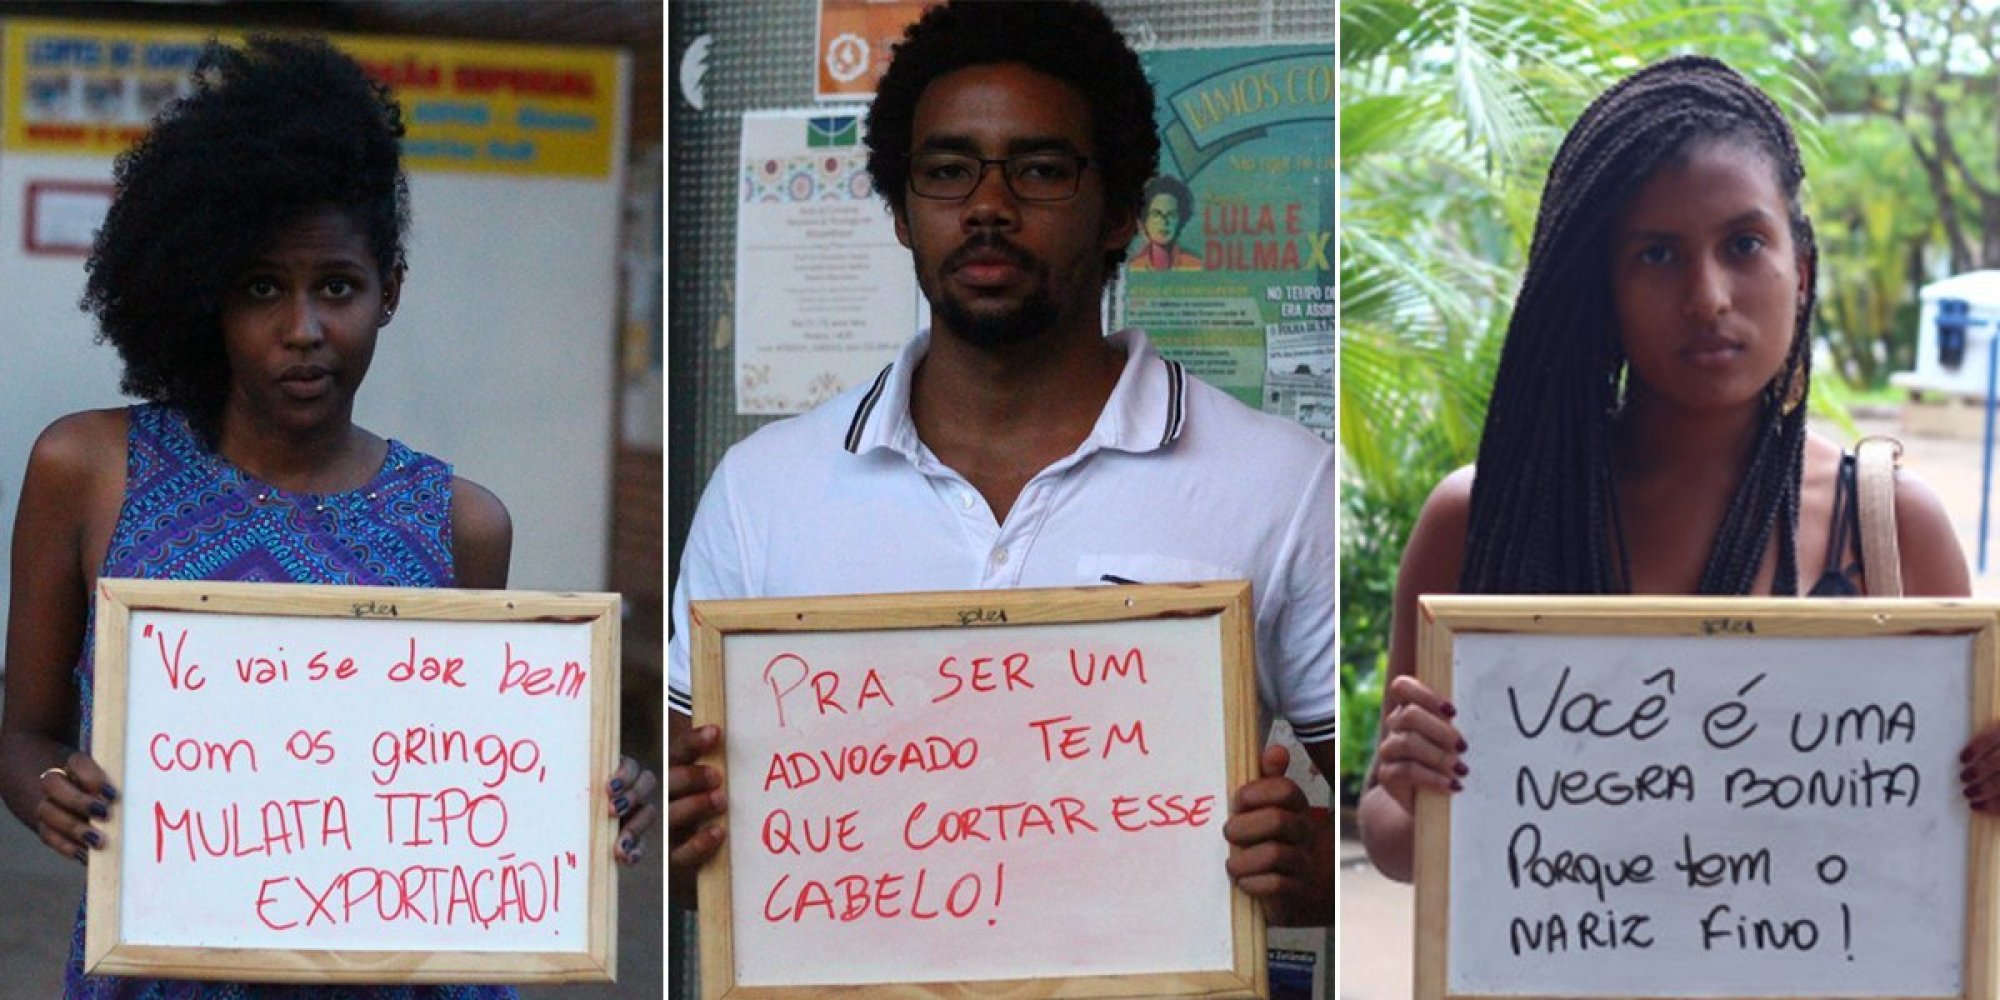 Anti-Racism Campaign Reveals The Struggles Of Minorities On Brazil's